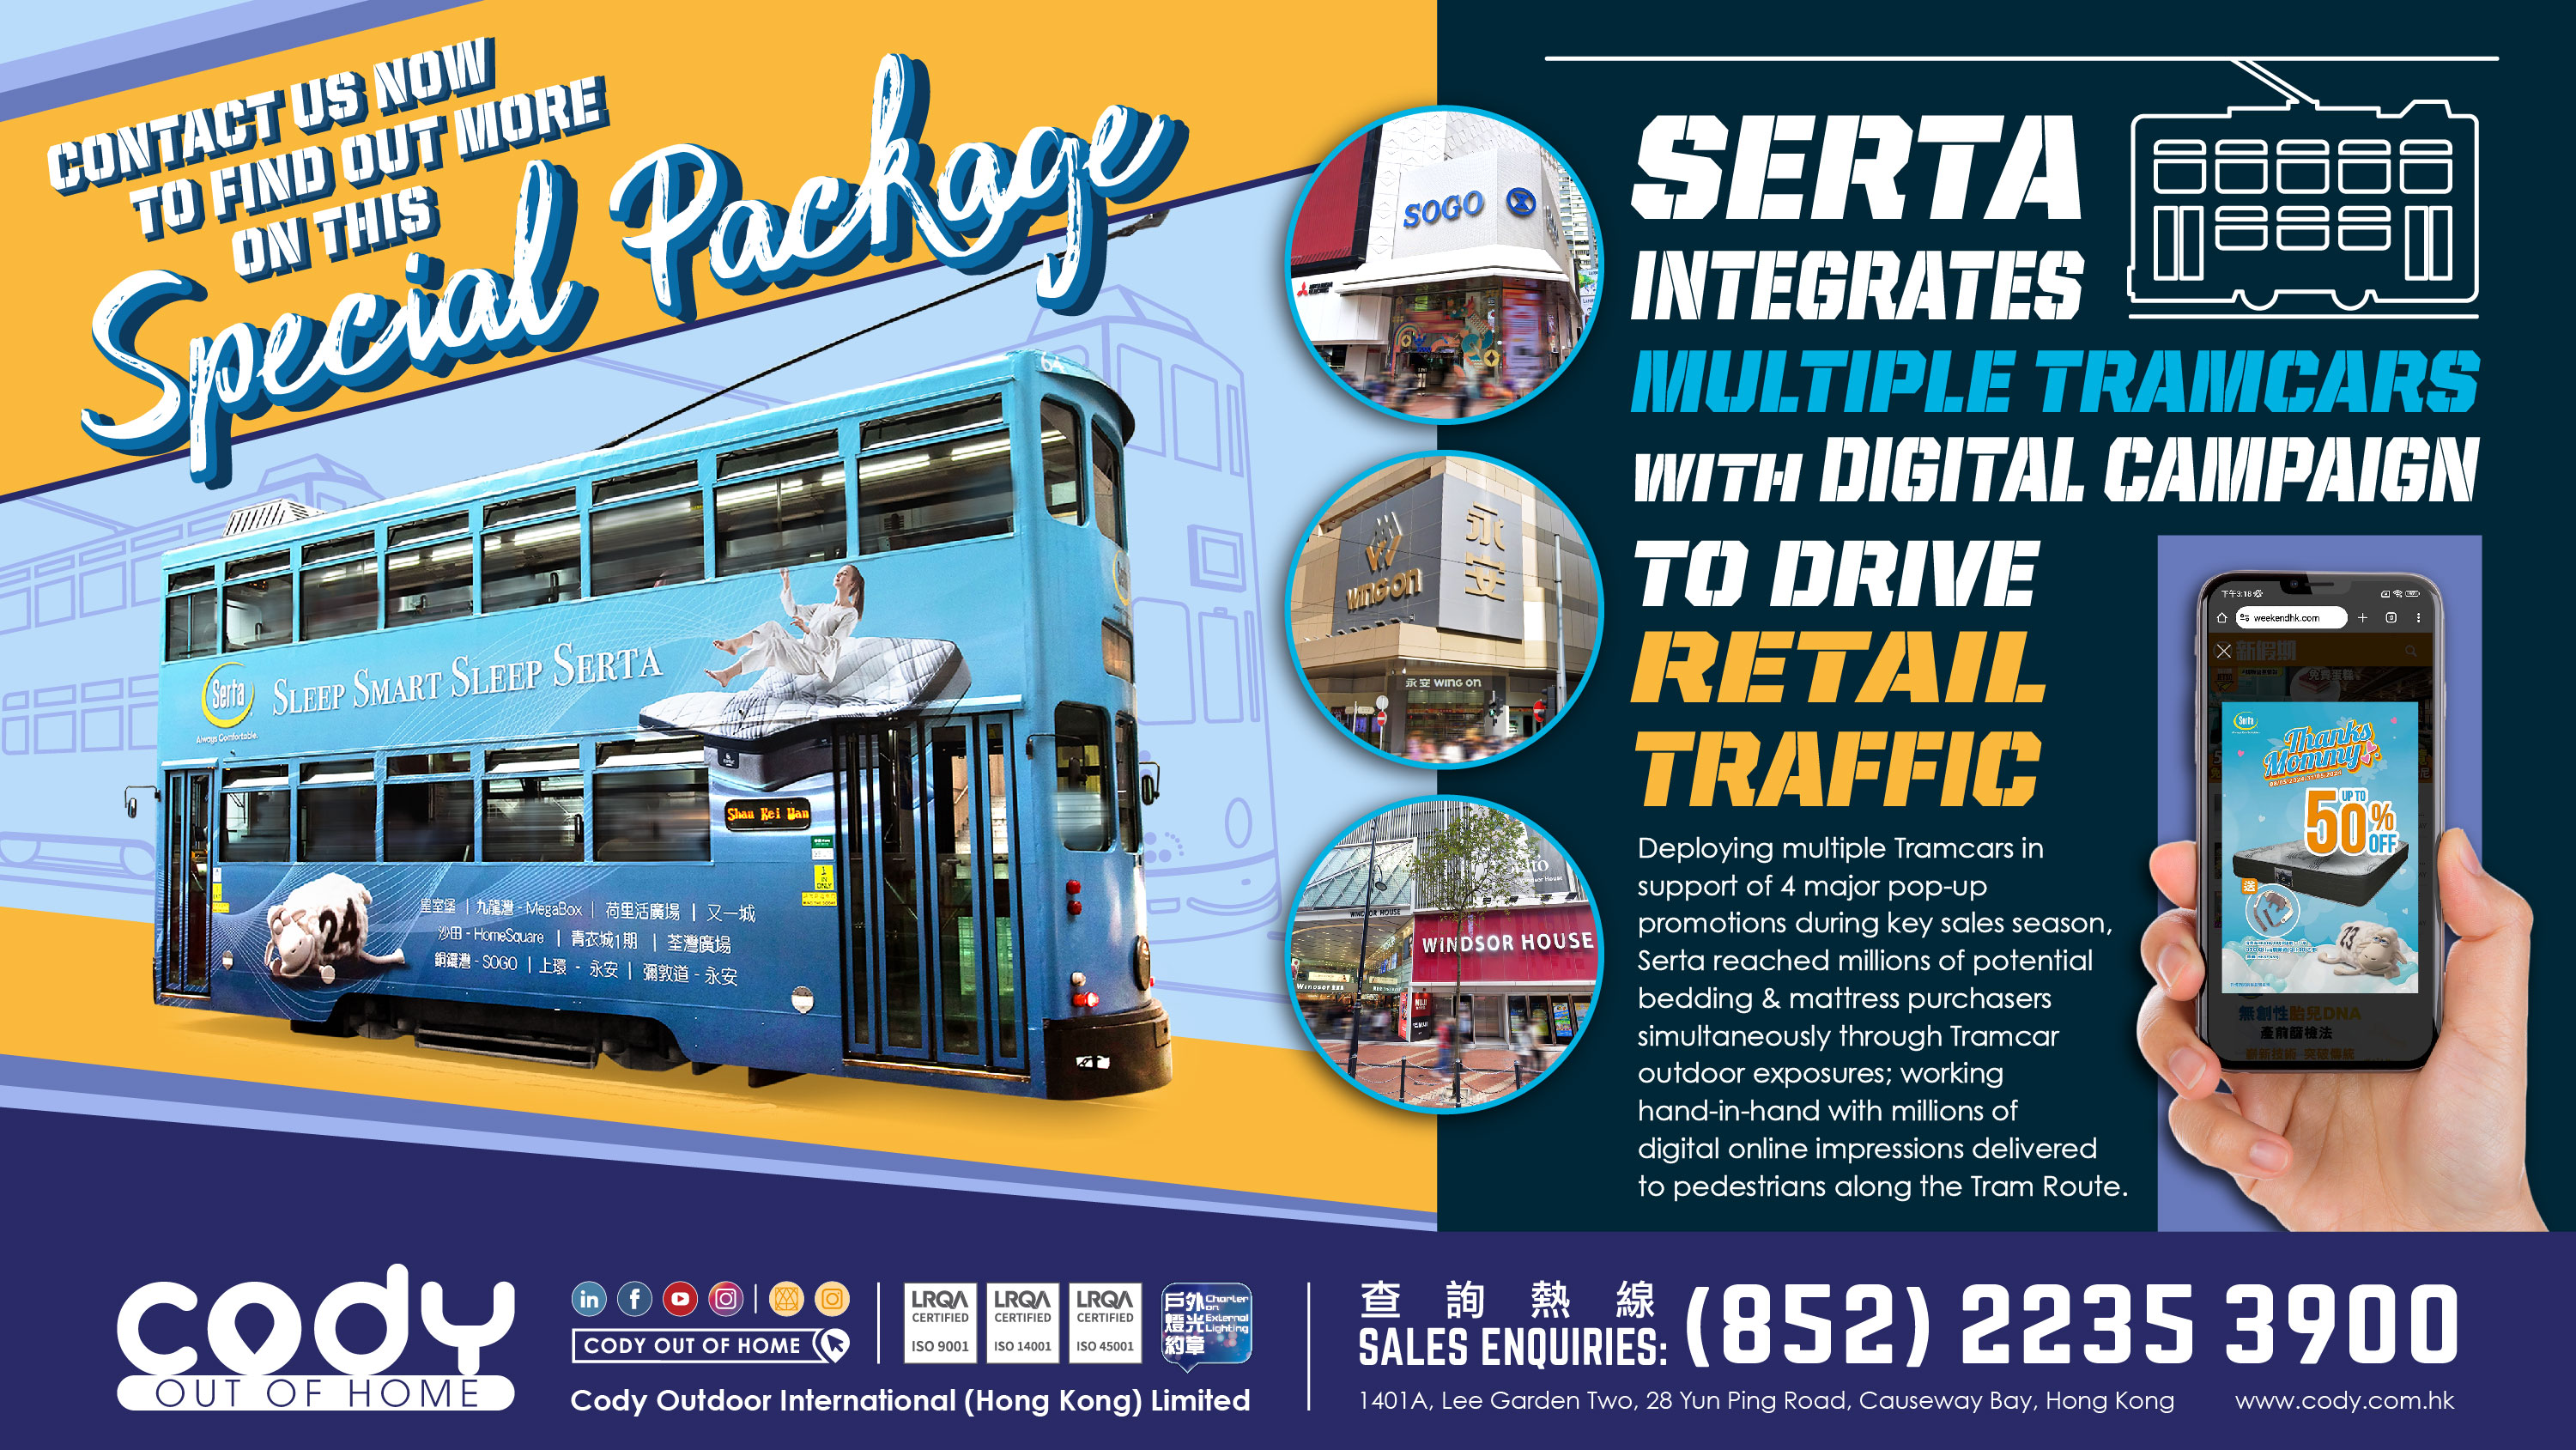 Serta Integrates Multiple Tramcars with Digital Campaign to Drive Retail Traffic | Contact us NOW to find out more on this SPECIAL PACKAGE